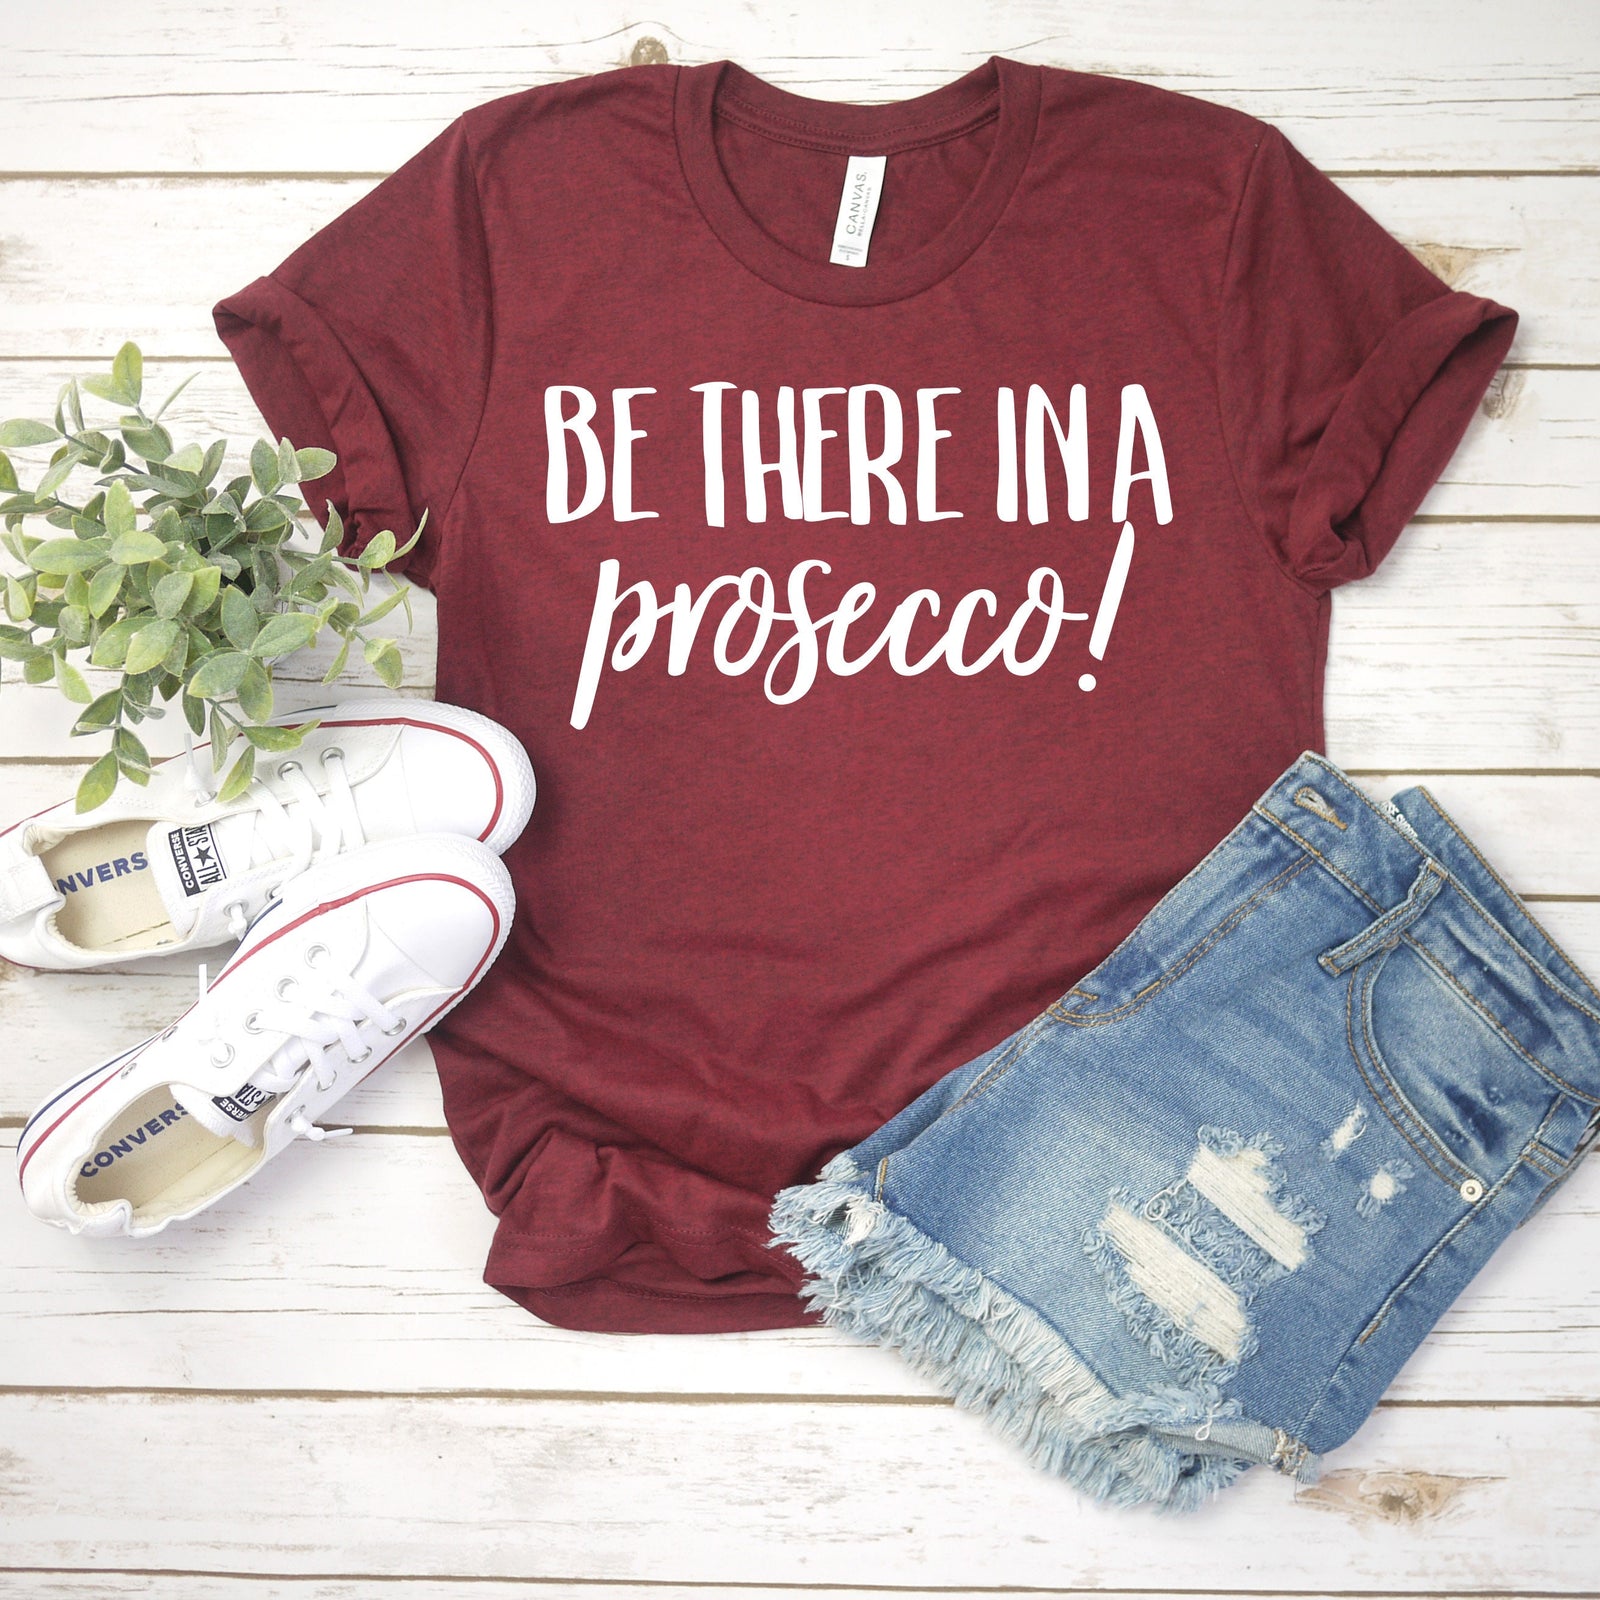 Be There in a Prosecco Christmas T Shirt - Funny Wine Lover Shirt - Matching Couple Shirt - Christmas Party Shirt